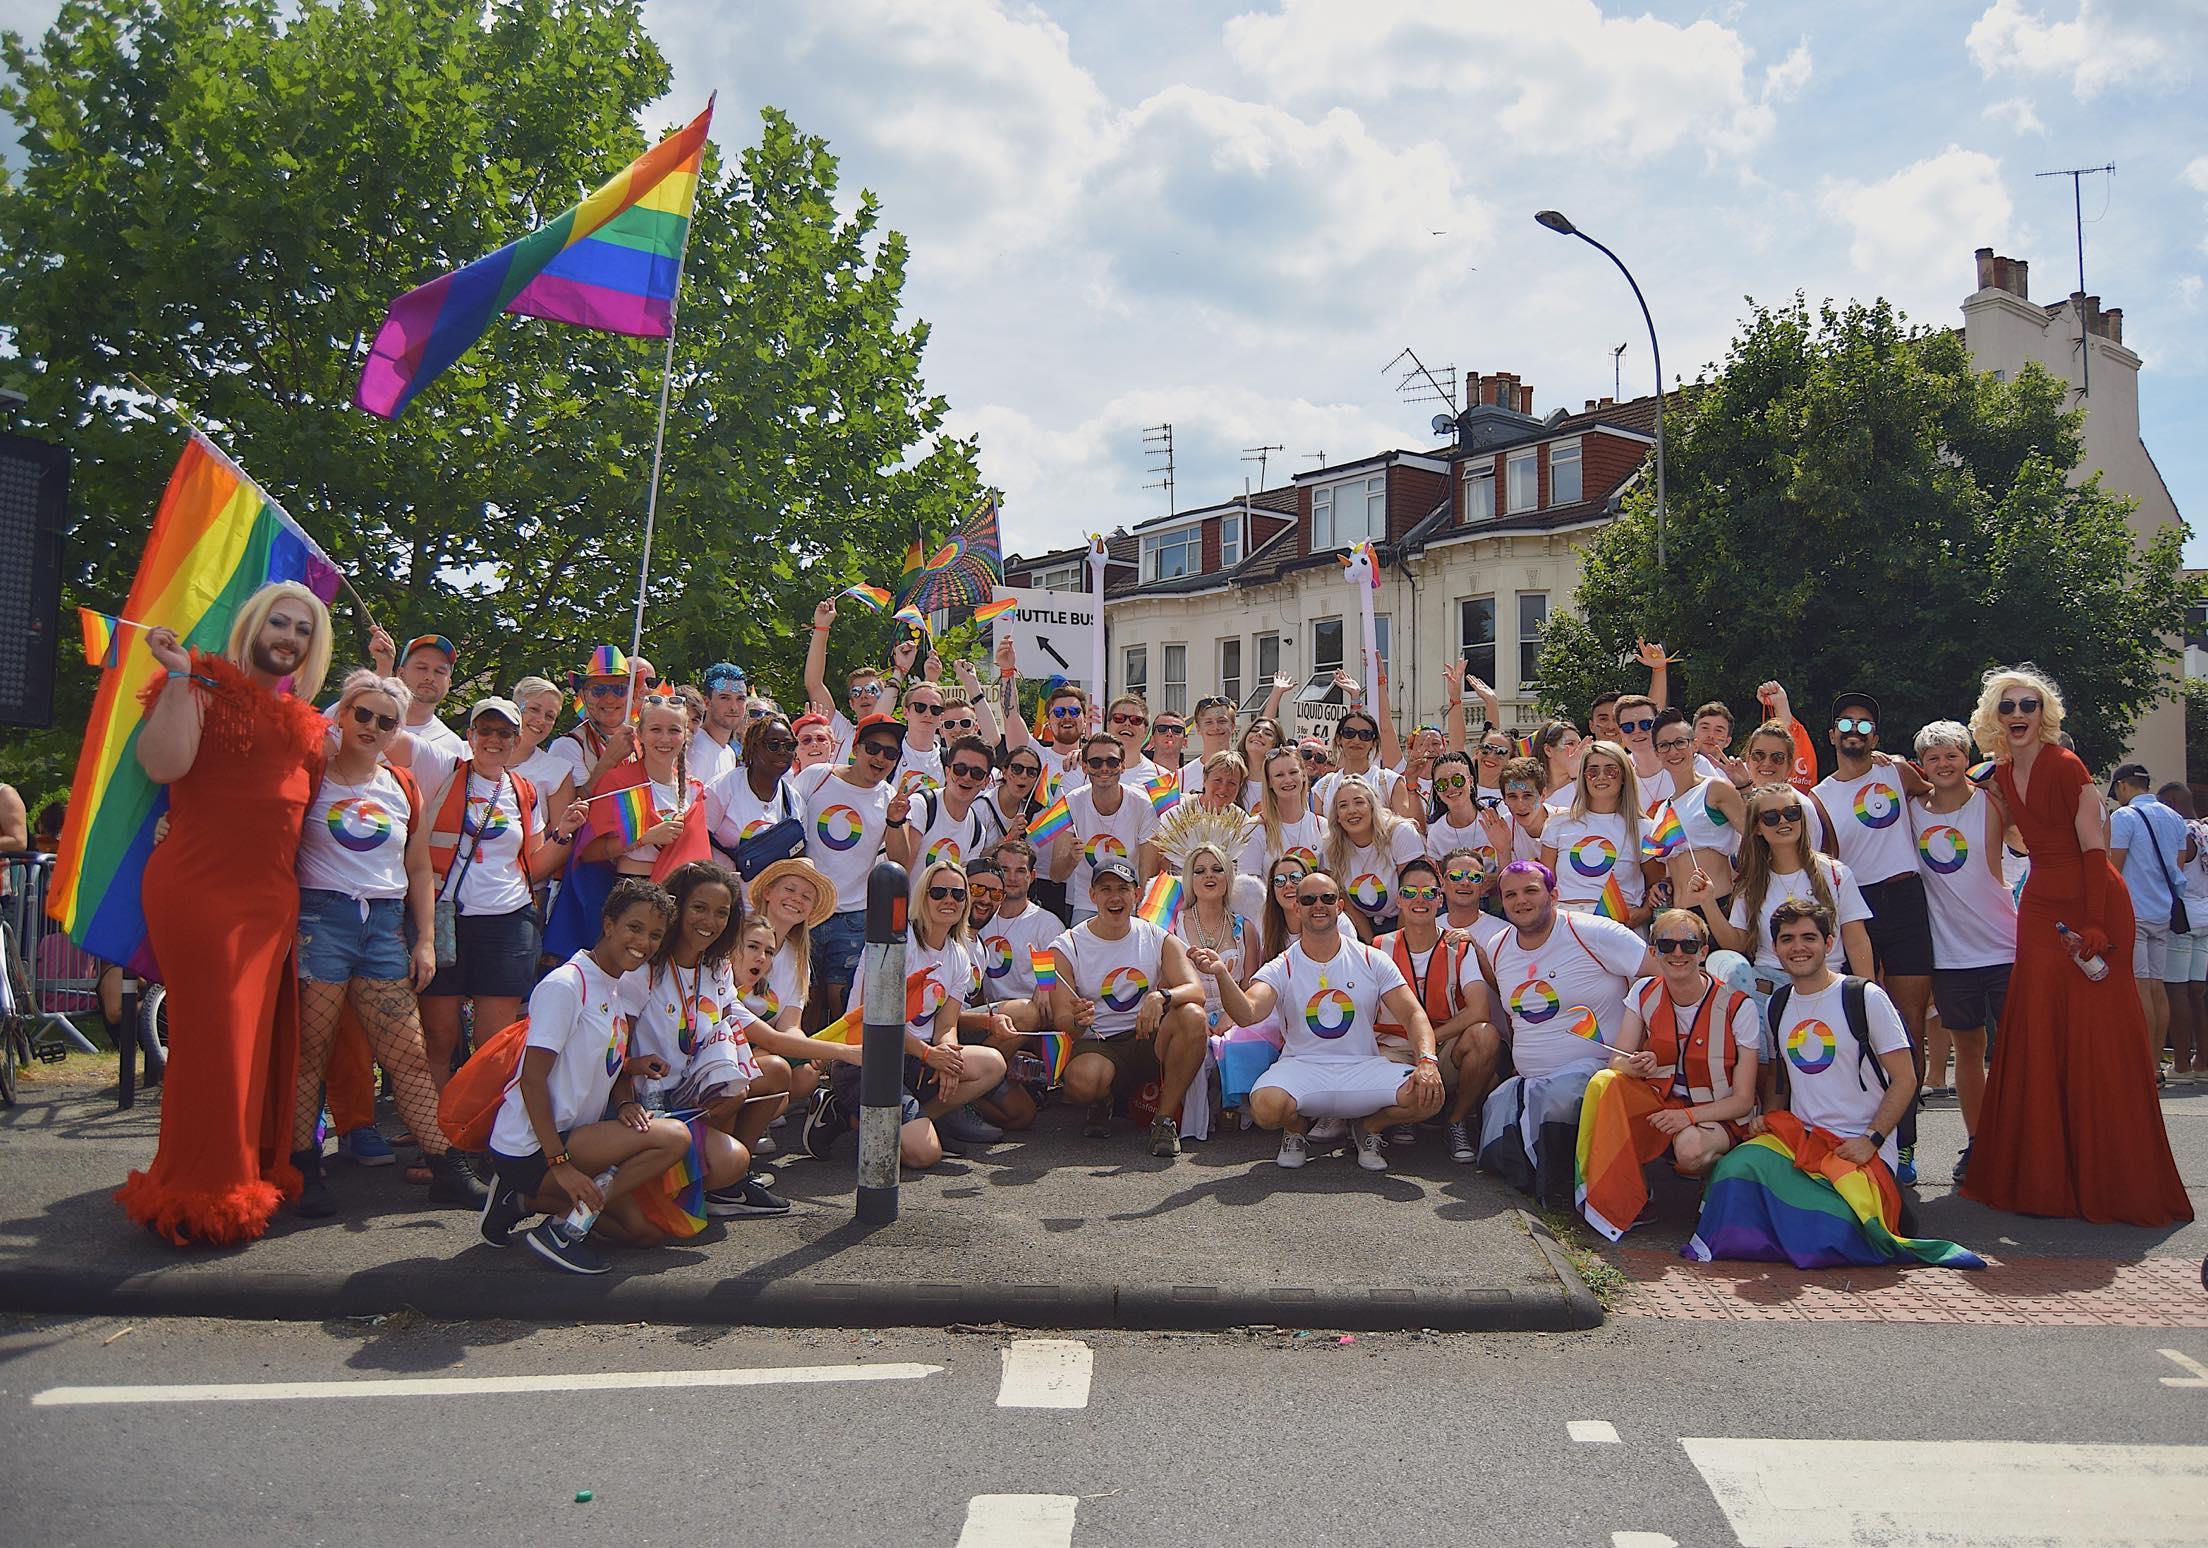 A group of people in LGBT vodafone branded tops and flags at a pride event